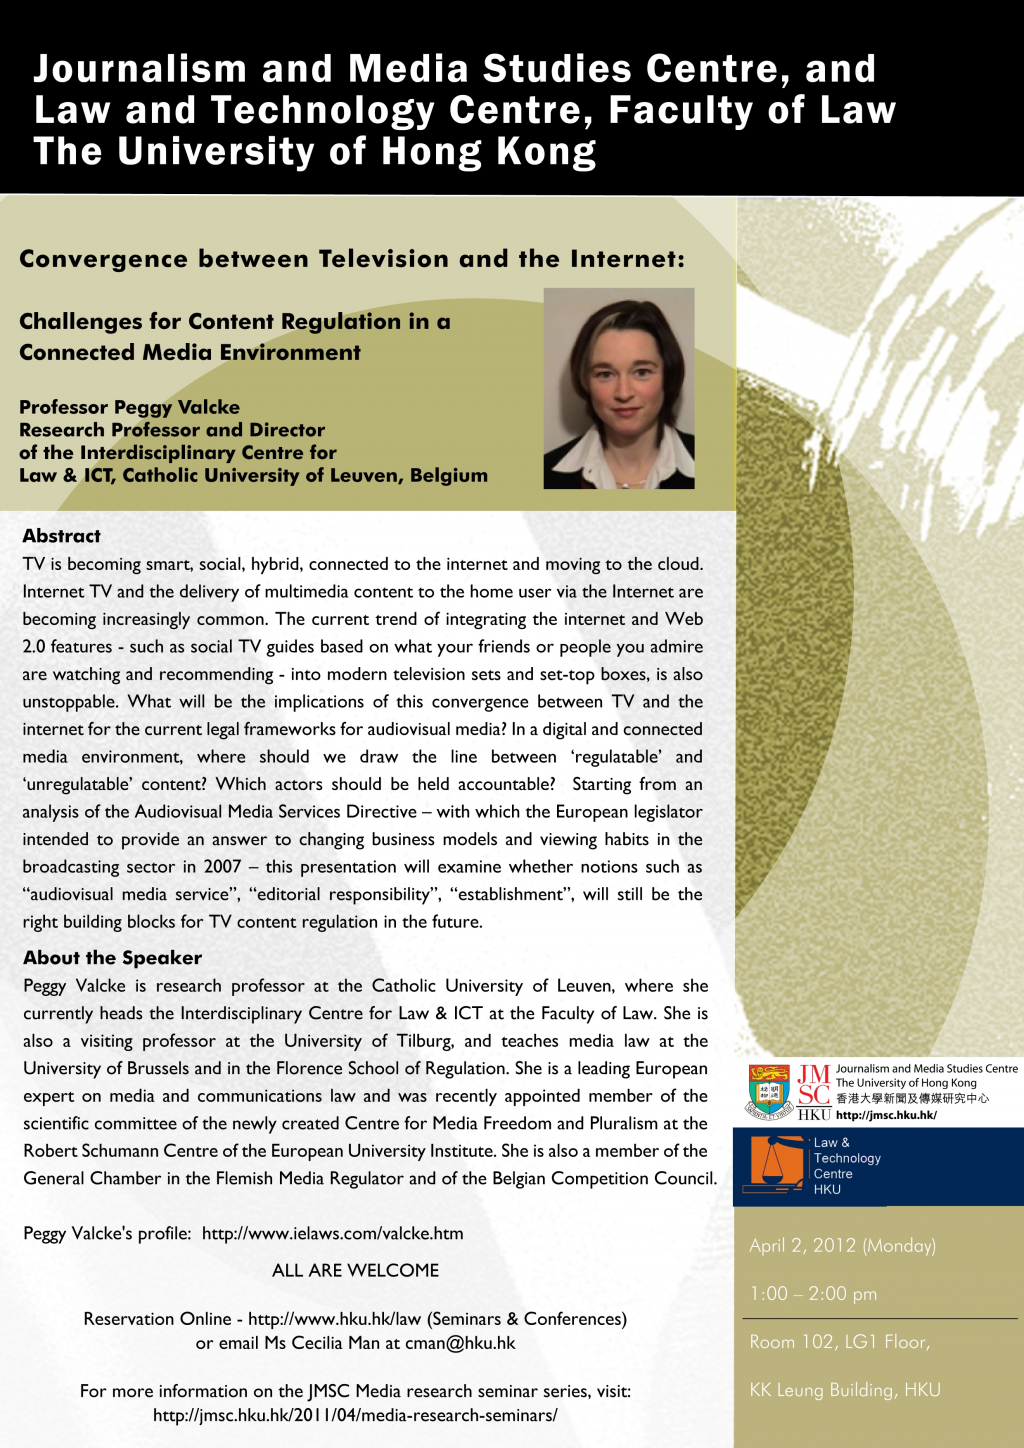 Convergence between Television and the Internet: Challenges for Content Regulation in a Connected Media Environment